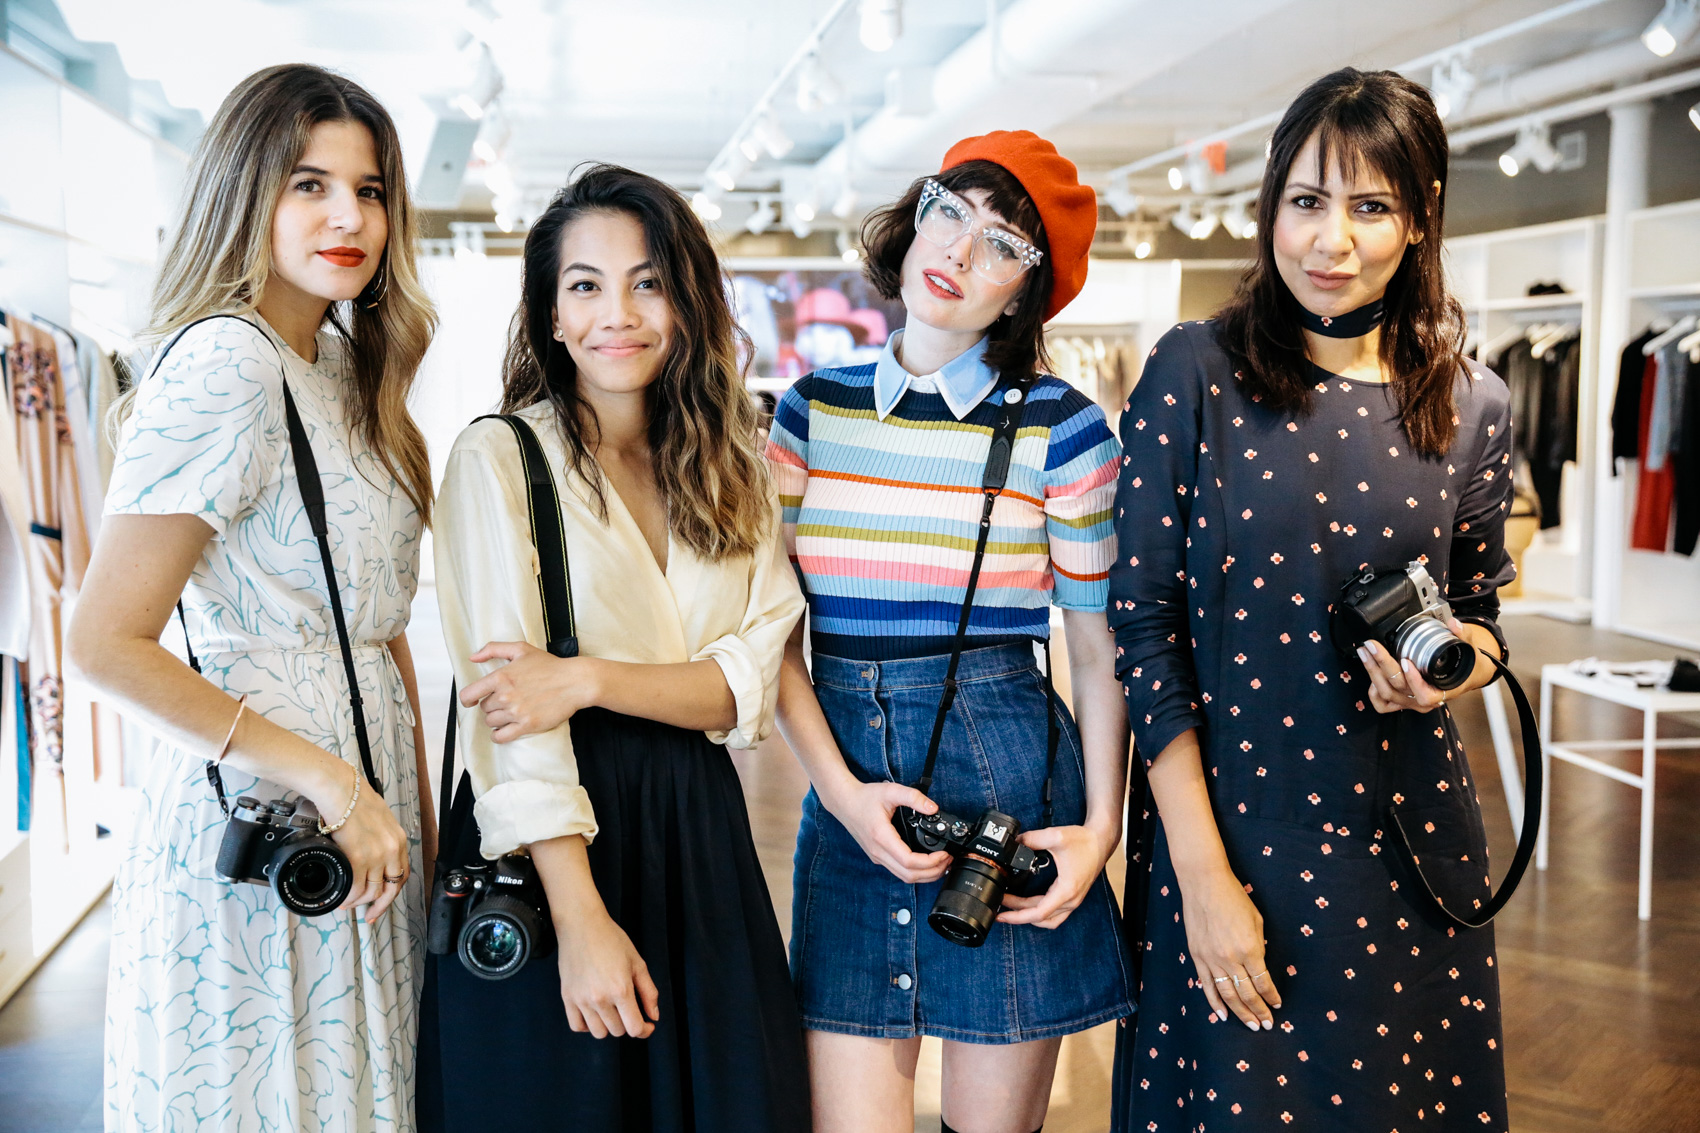 Bloglovin Awards' Breakthrough Fashion Blogger of the Year nominees Maristella Gonzalez of A Constellation Journal, Jannel Therese of Street Style Teller, Amy Roiland of A Fashion Nerd and Taye Hansberry of Stuff She Likes